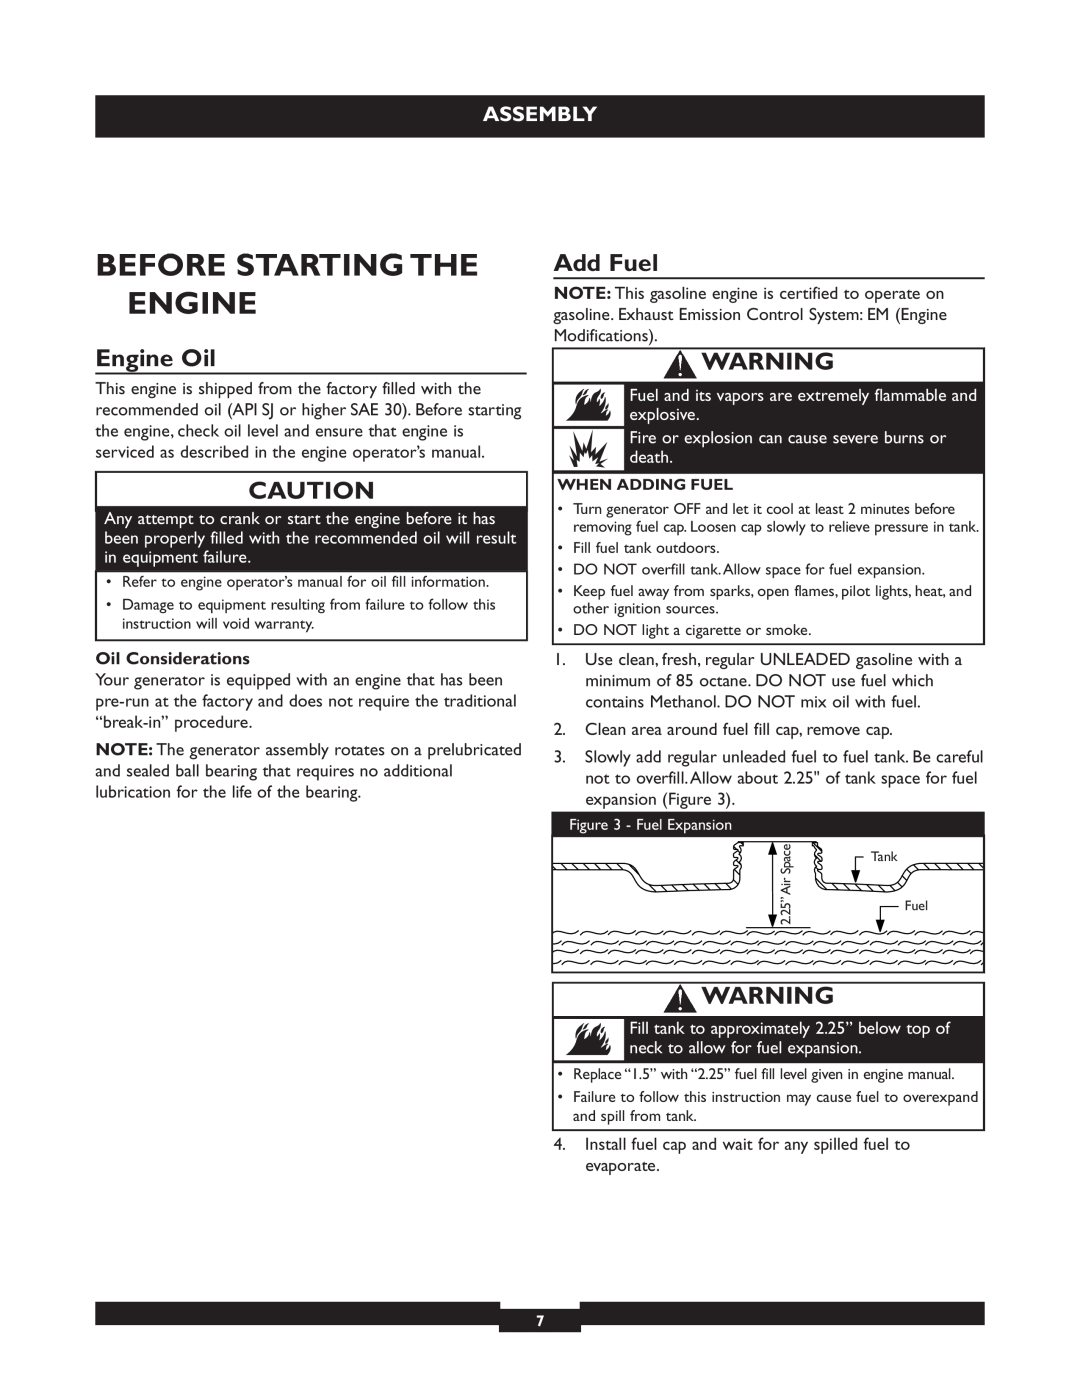 Briggs & Stratton 30205 manual Before Starting The Engine, Add Fuel, Engine Oil, Oil Considerations, Assembly 